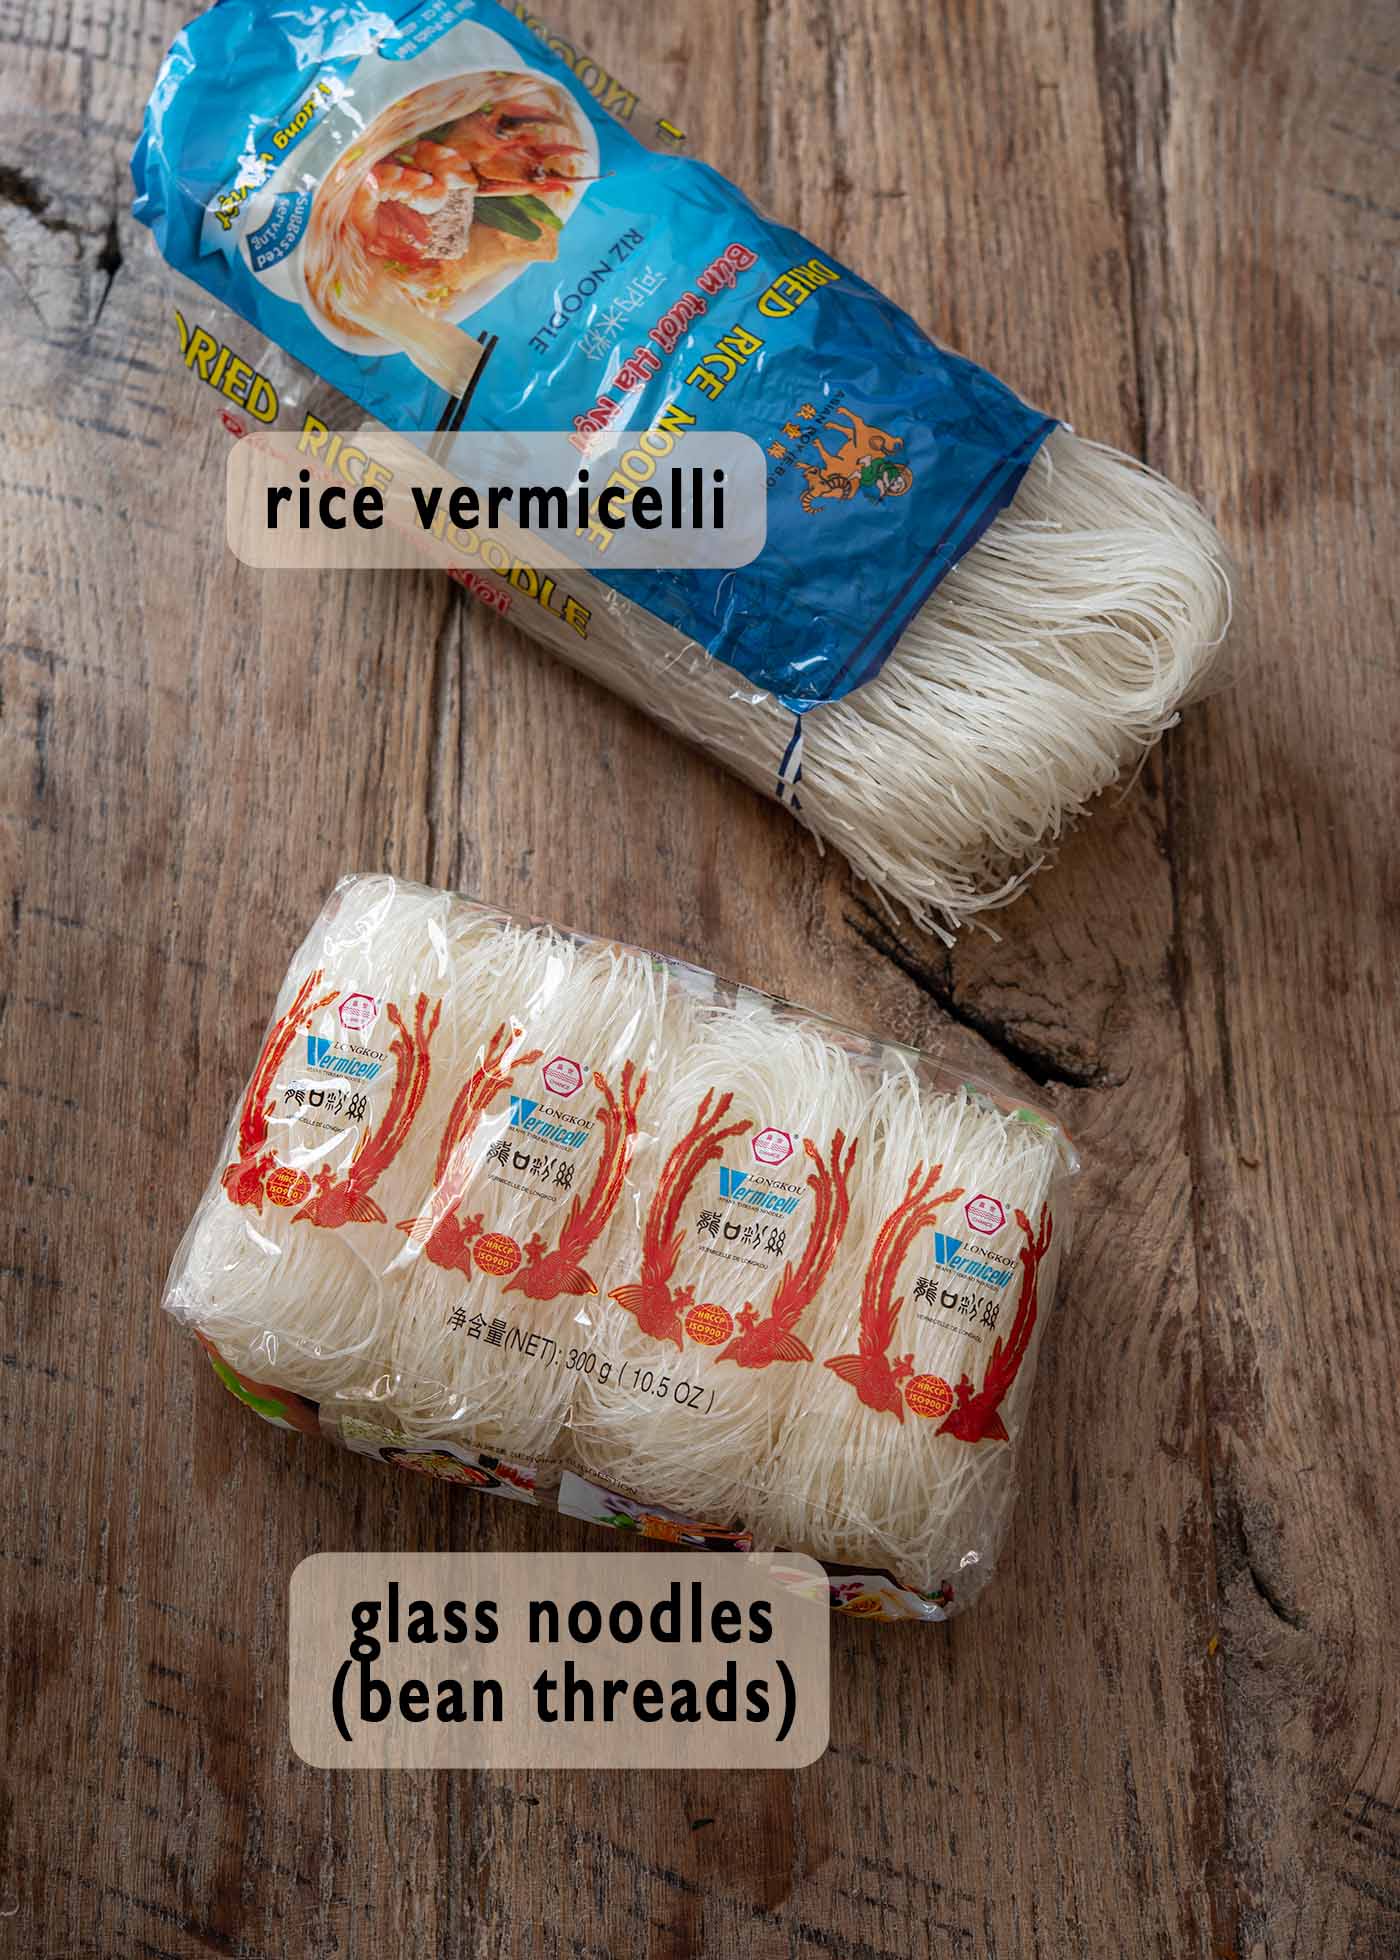 A packet of rice vermicelli and Thai glass noddles are shown together to compare.